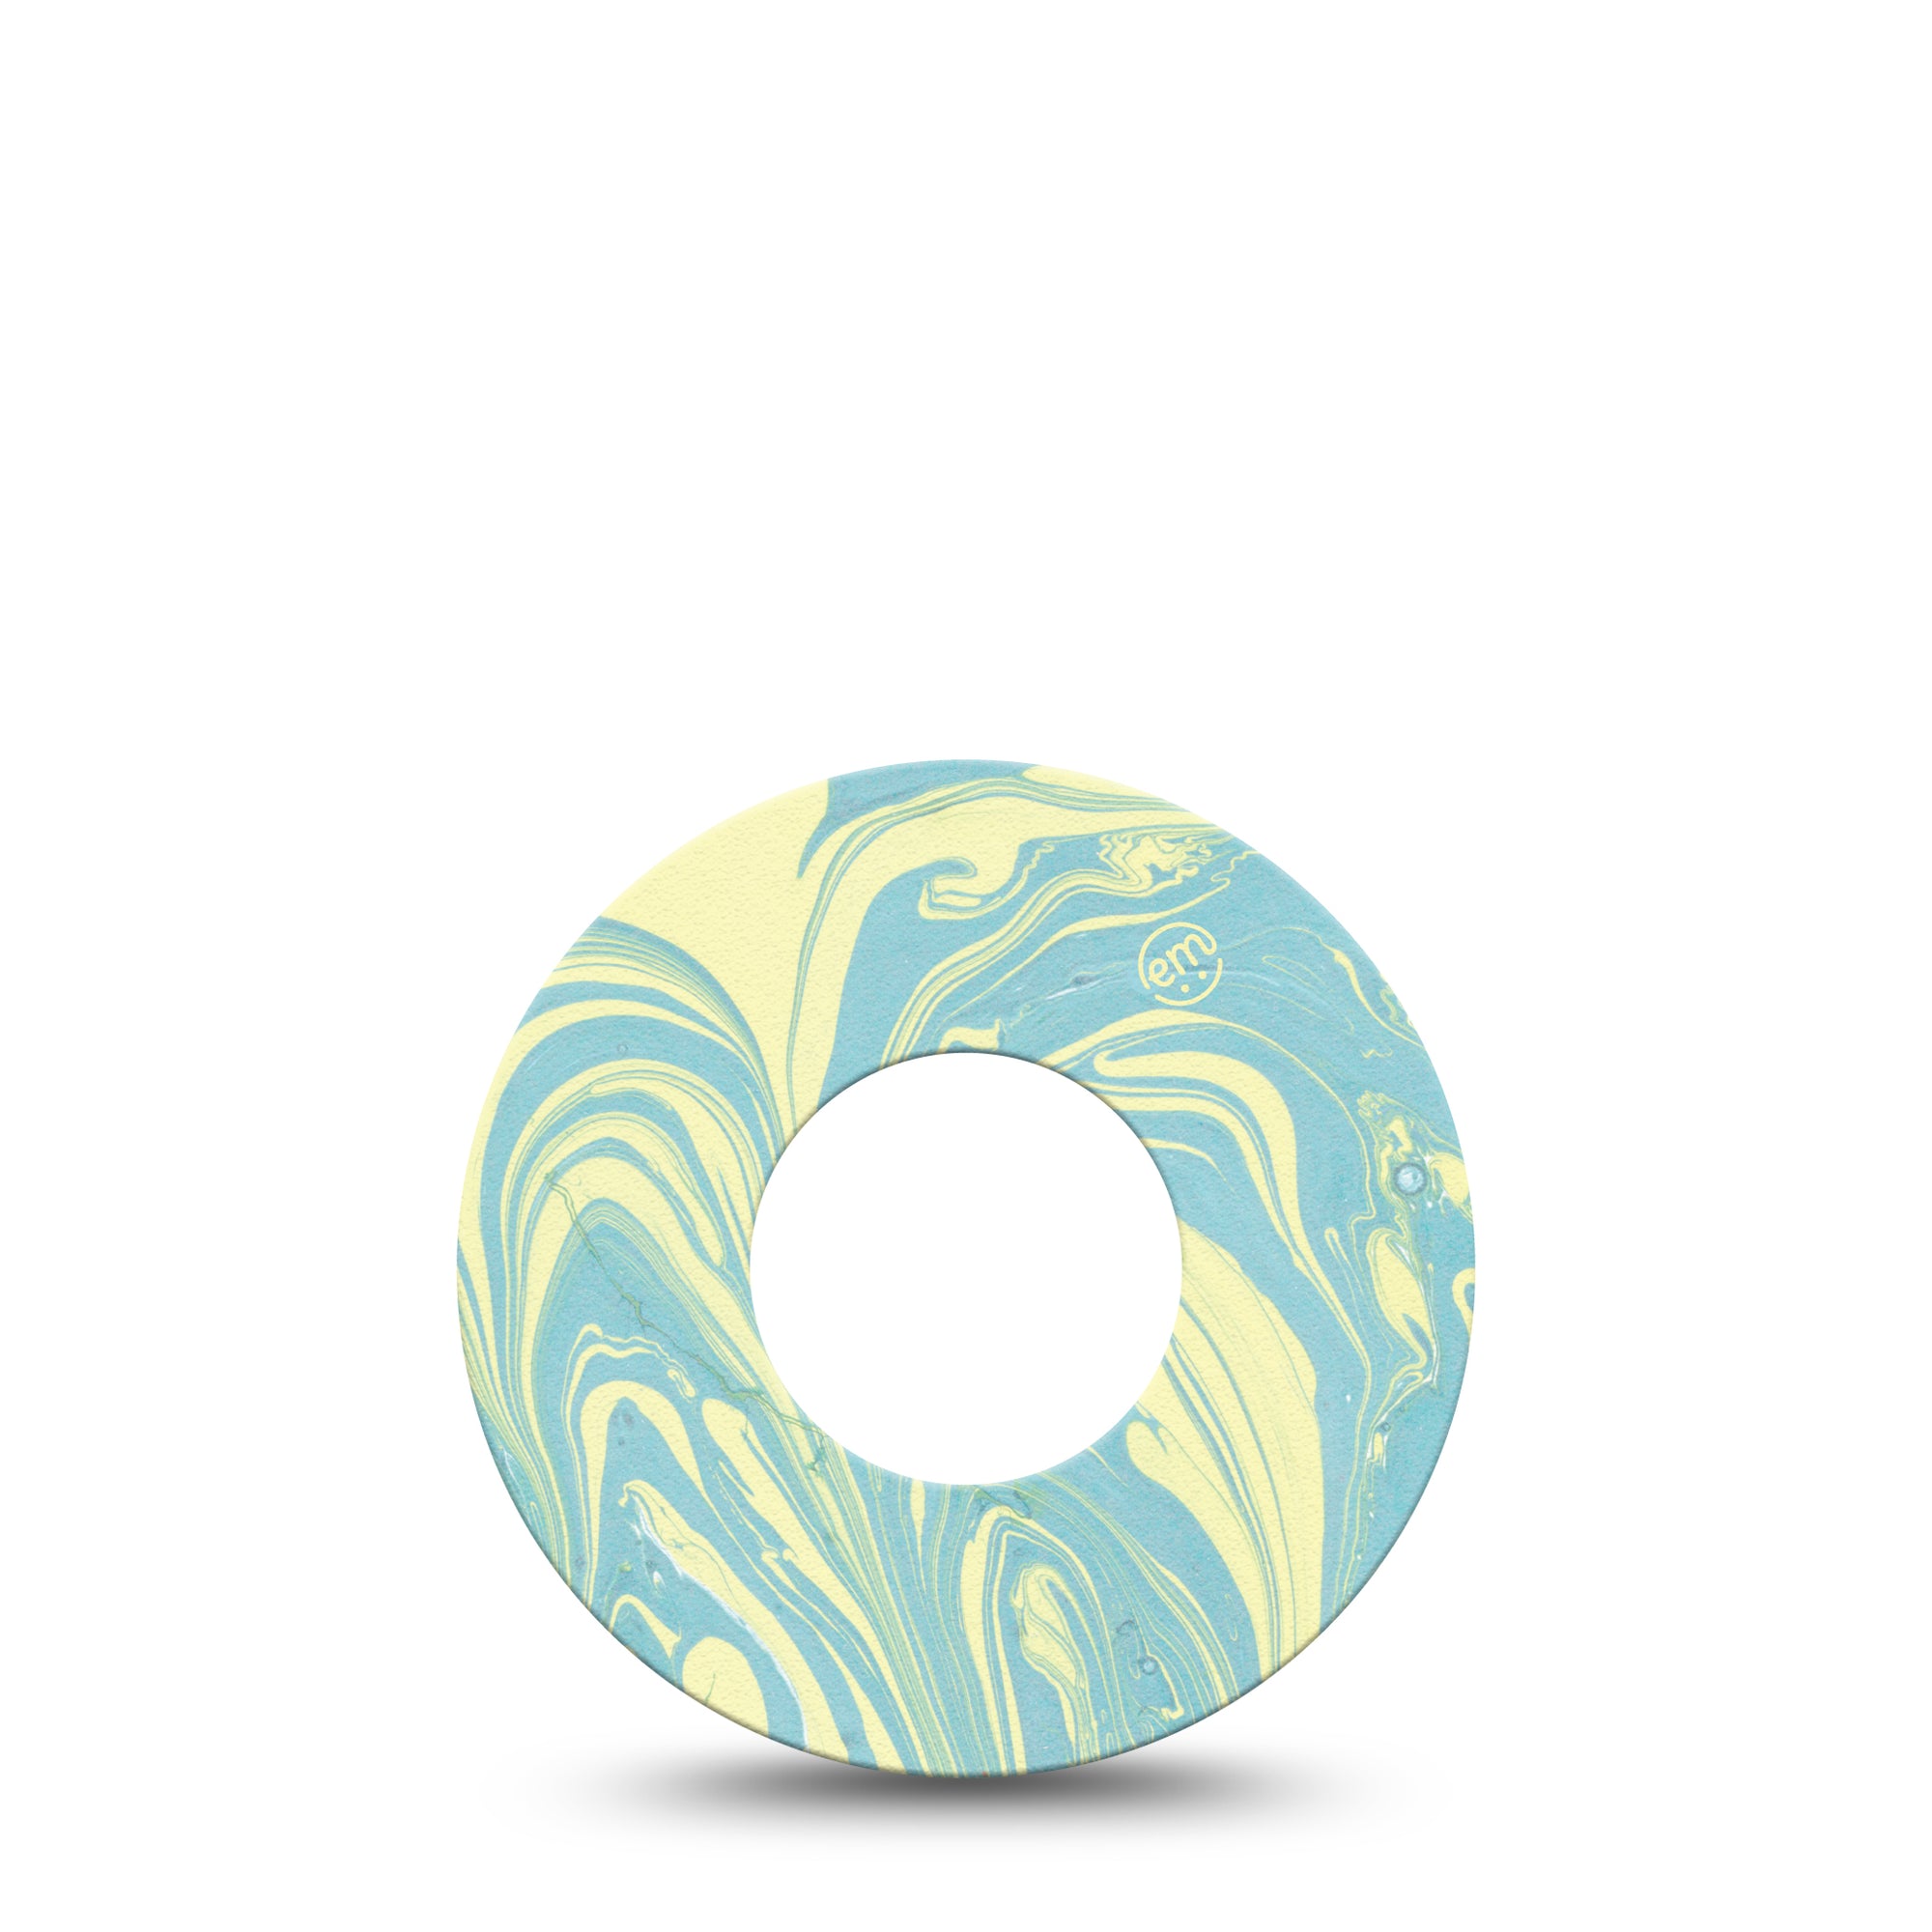 ExpressionMed Mixed Playdough Libre Tape